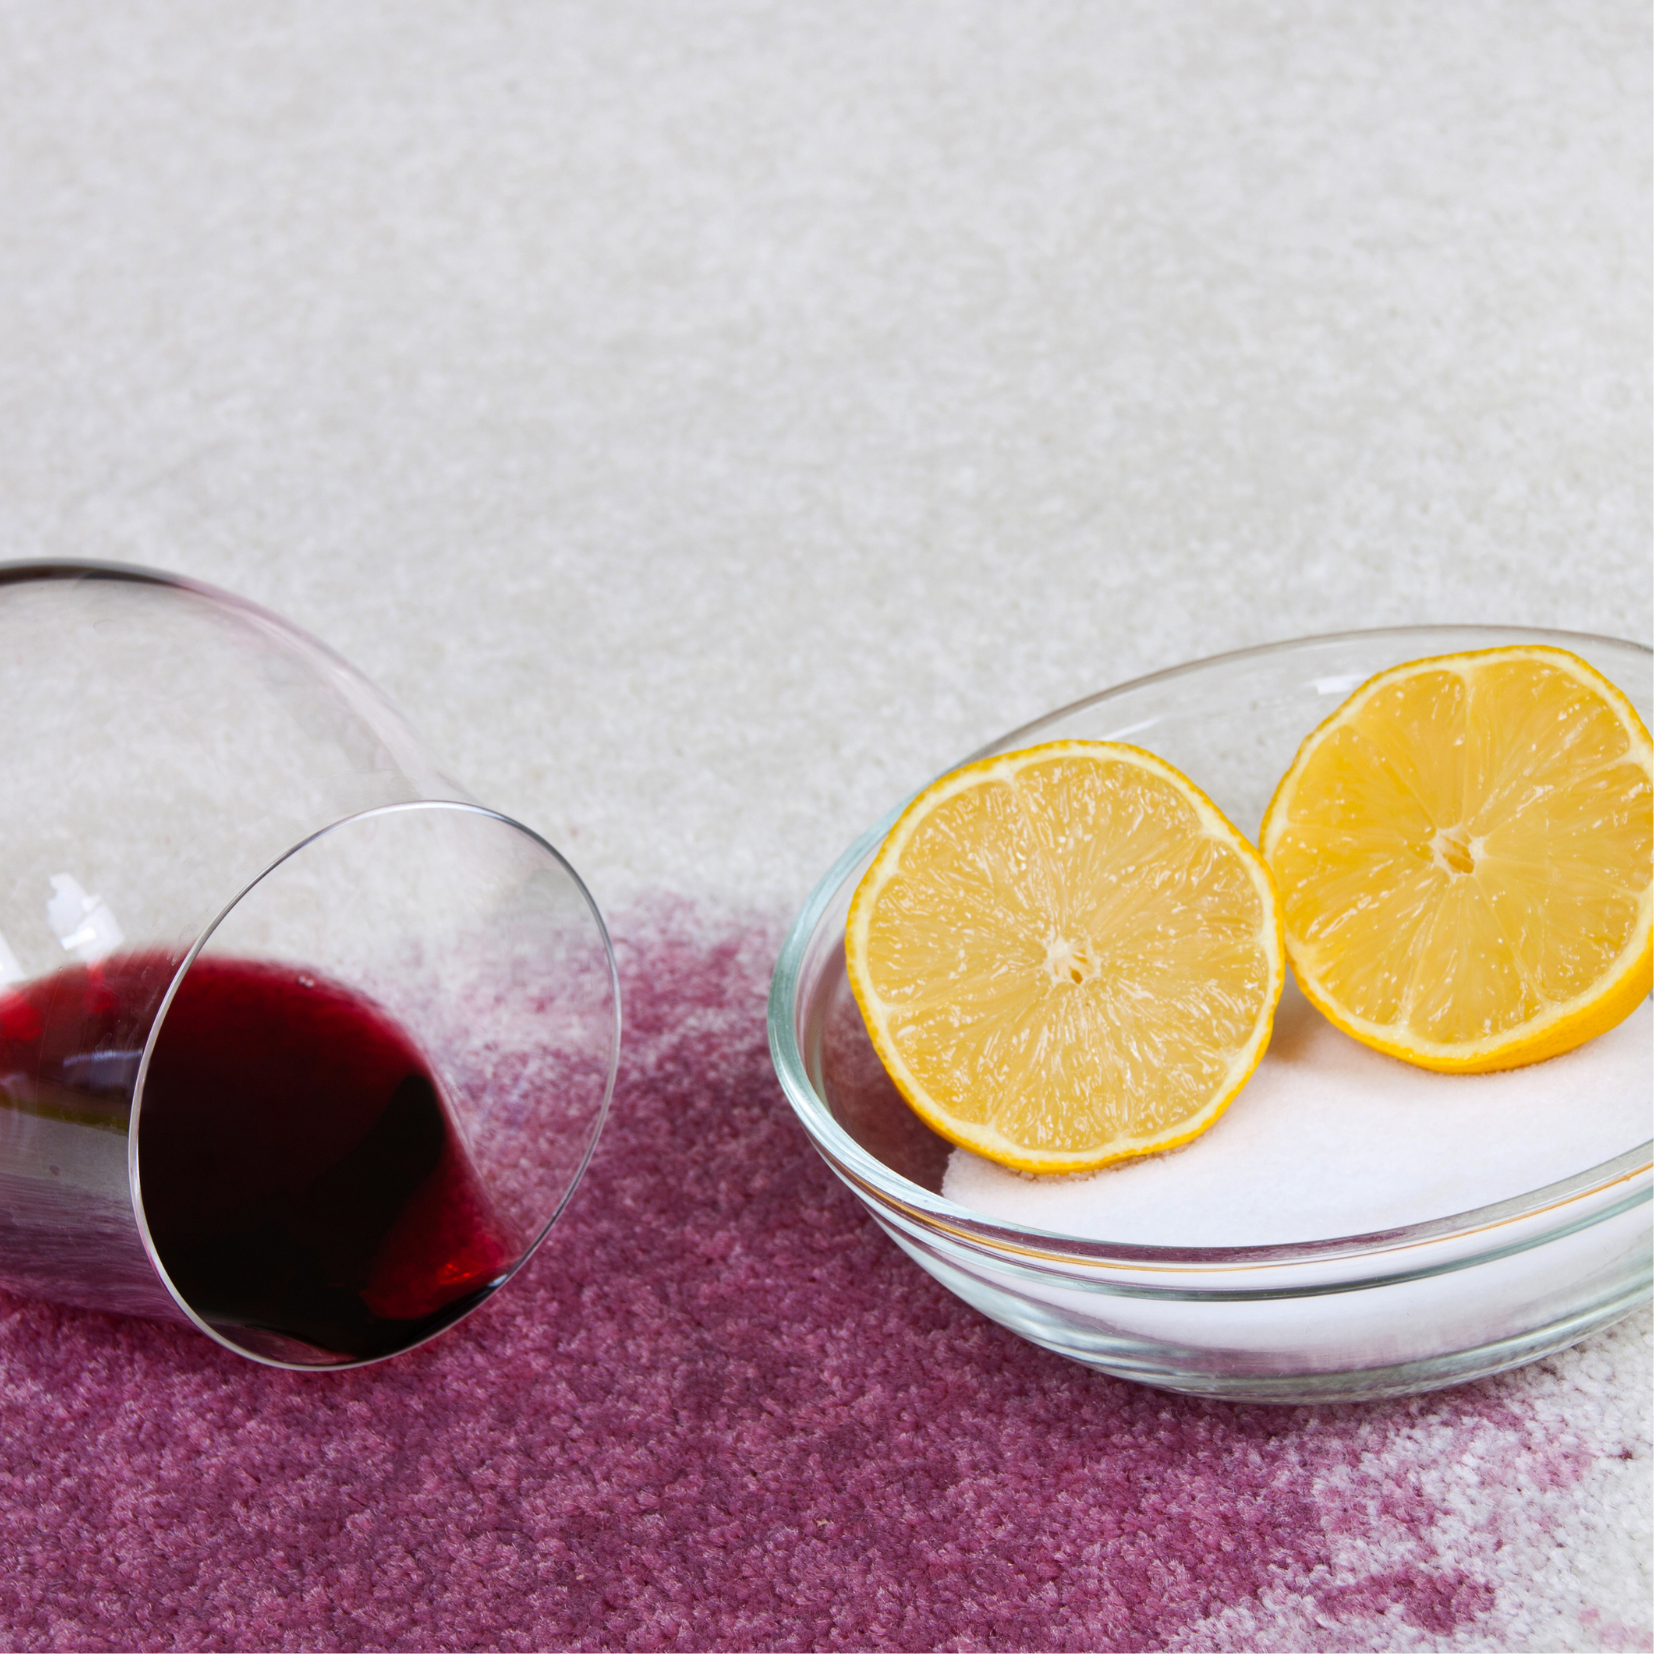 How to Remove Stains from Clothes wine stains